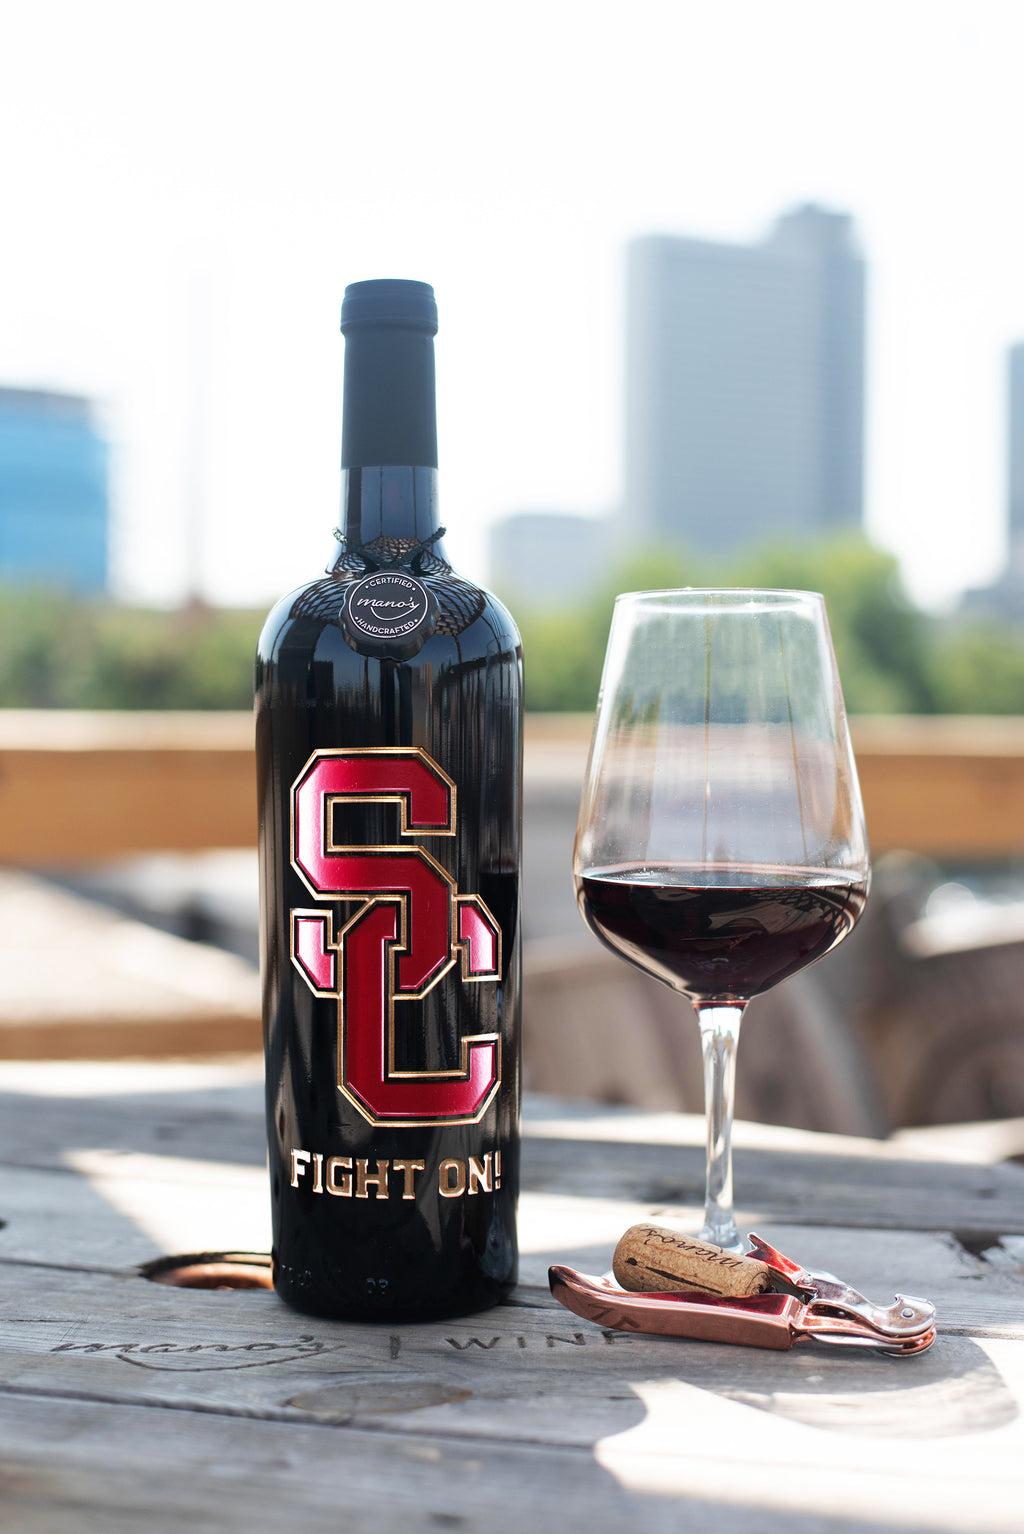 USC Fight On! Etched Wine